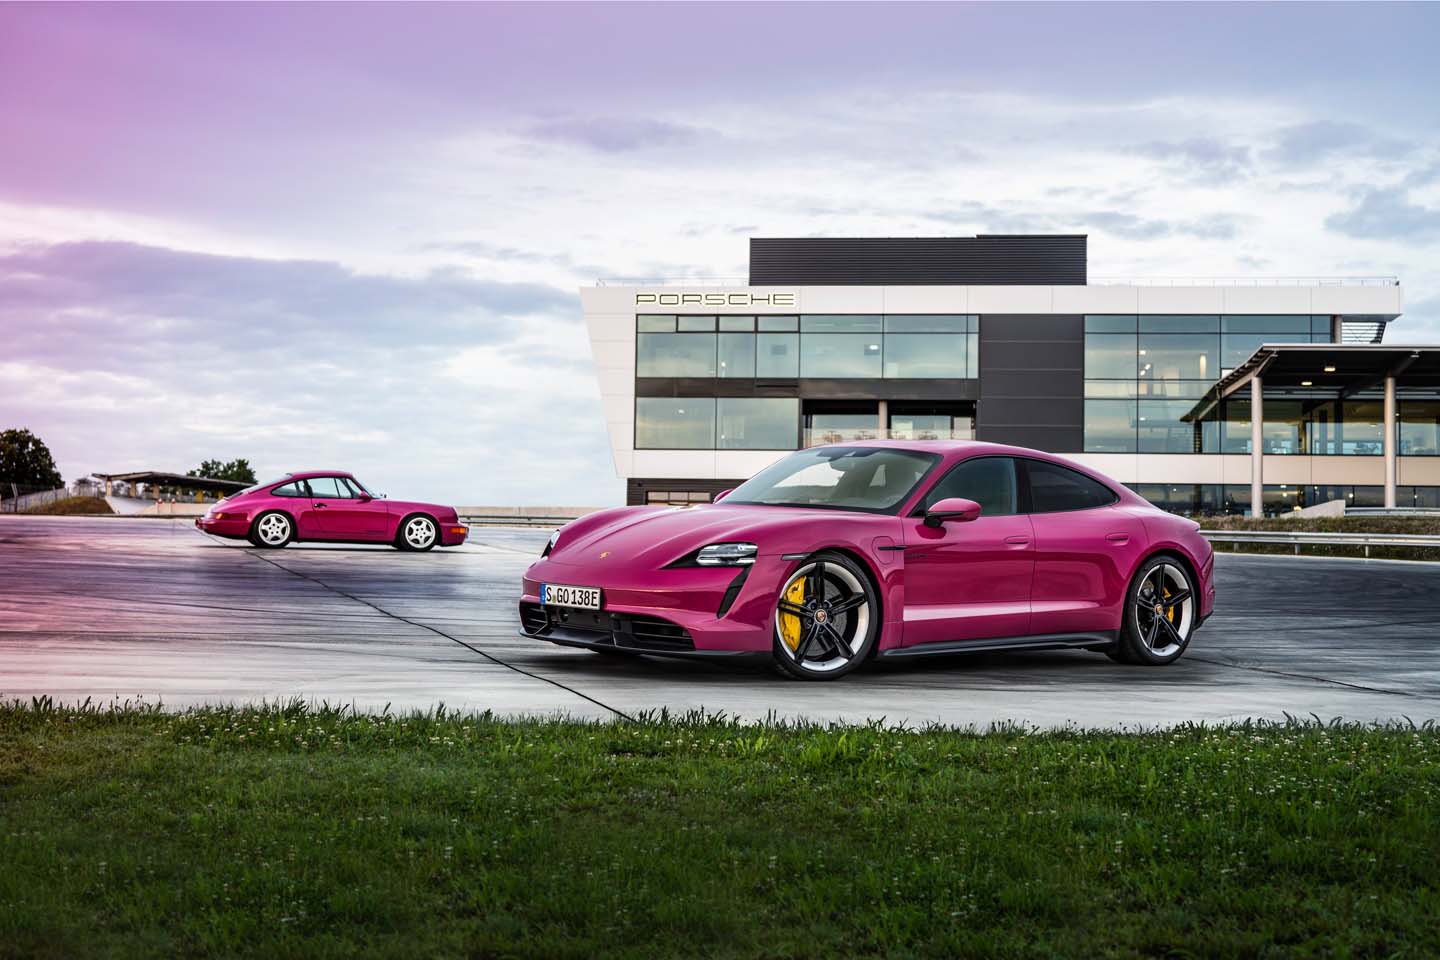 Porsche Wanders from Home: Takes First Step to Building Outside of Germany